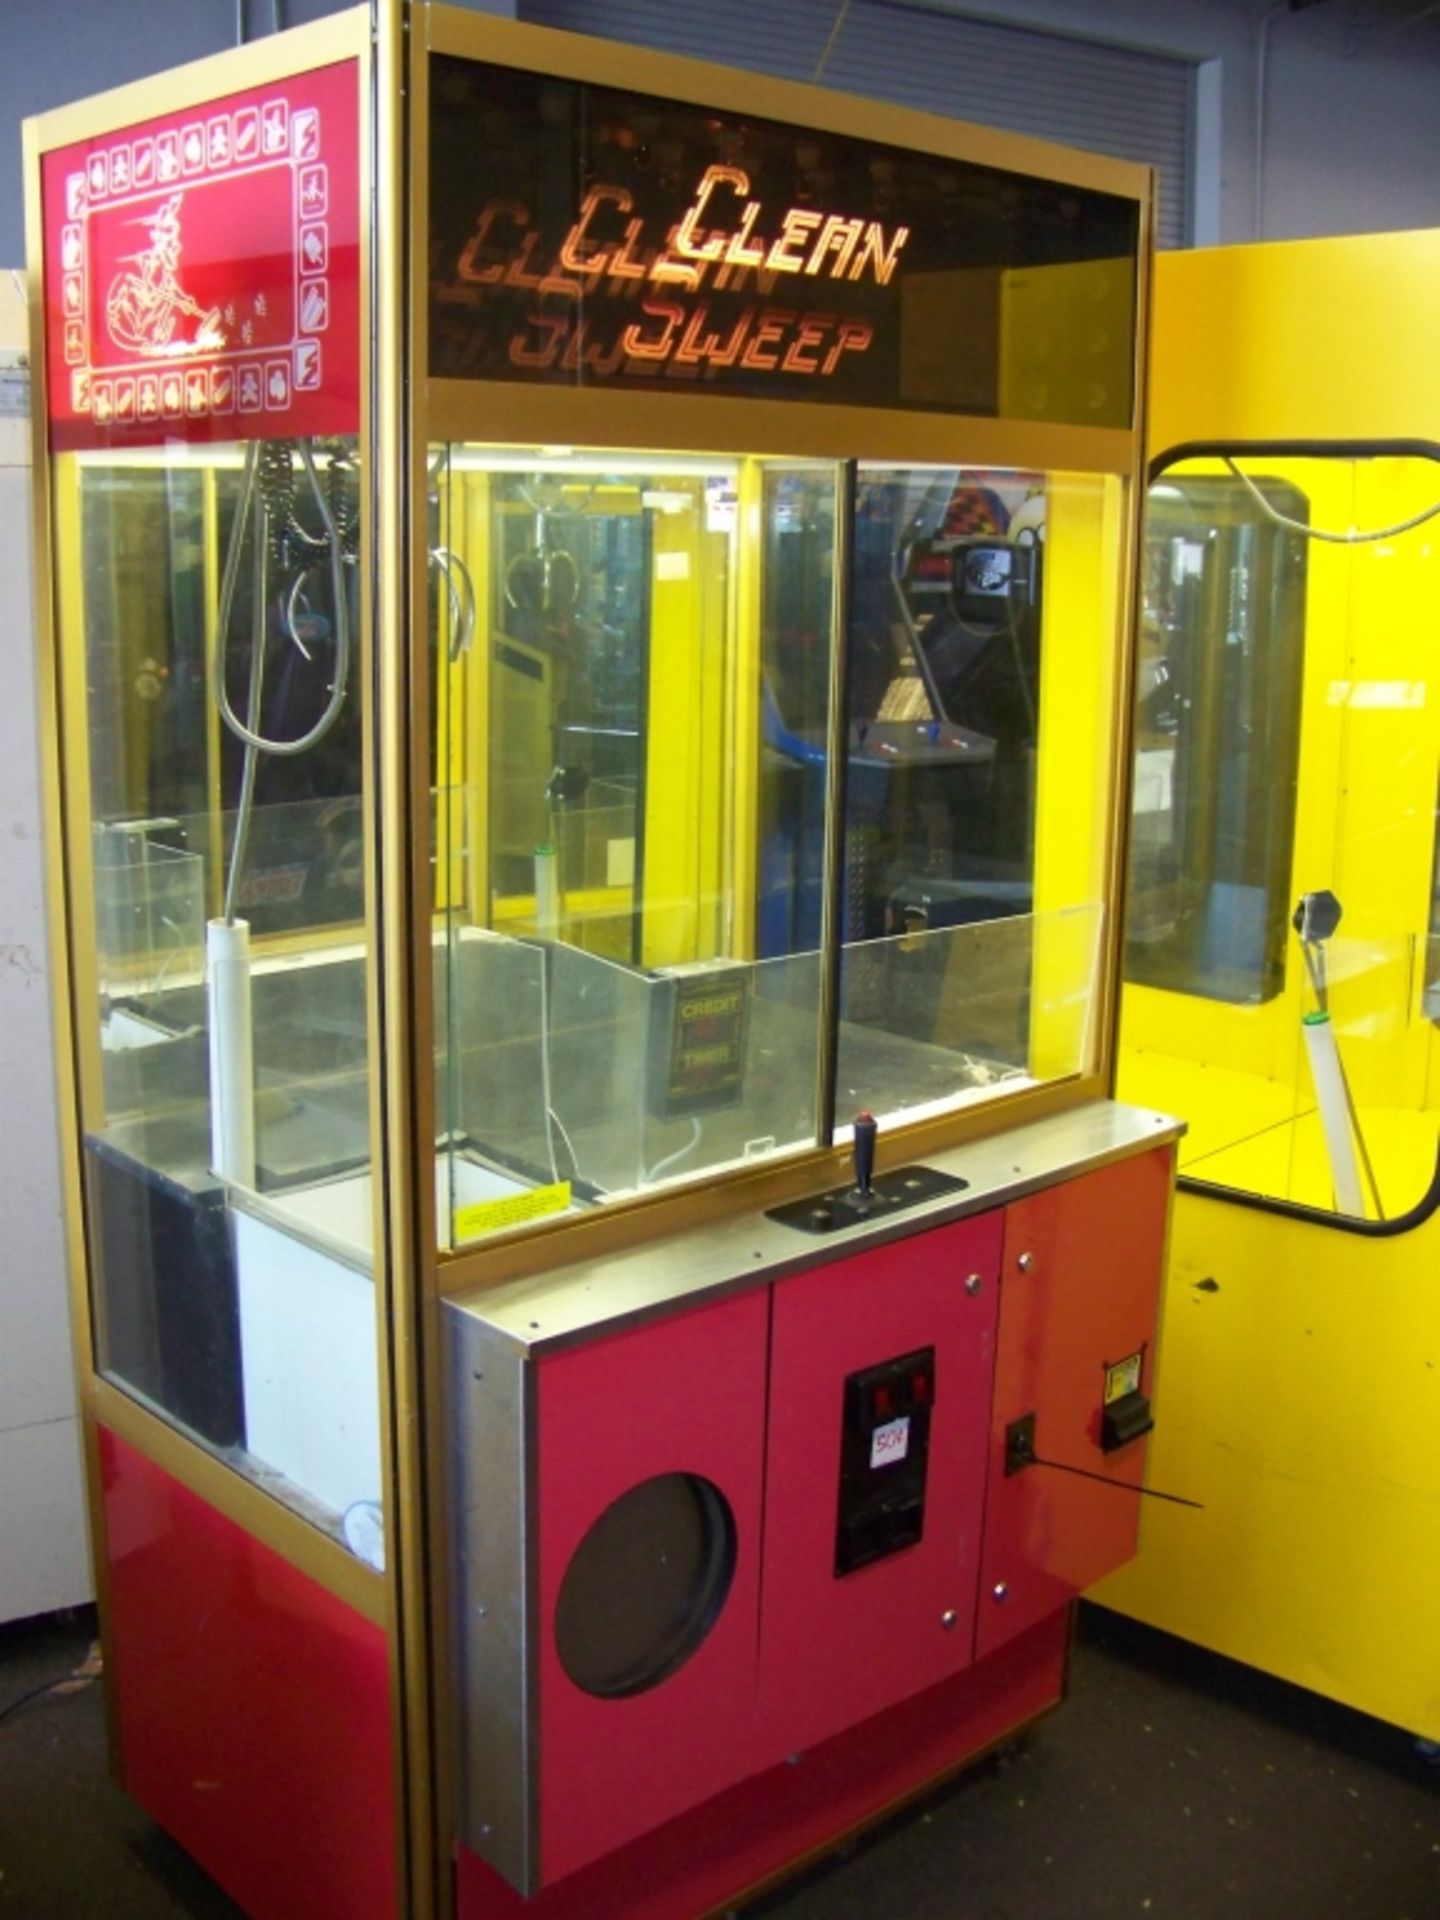 42"" SMART CLEAN SWEEP RED PLUSH CLAW CRANE MACHINE Item is in used condition. Evidence of wear